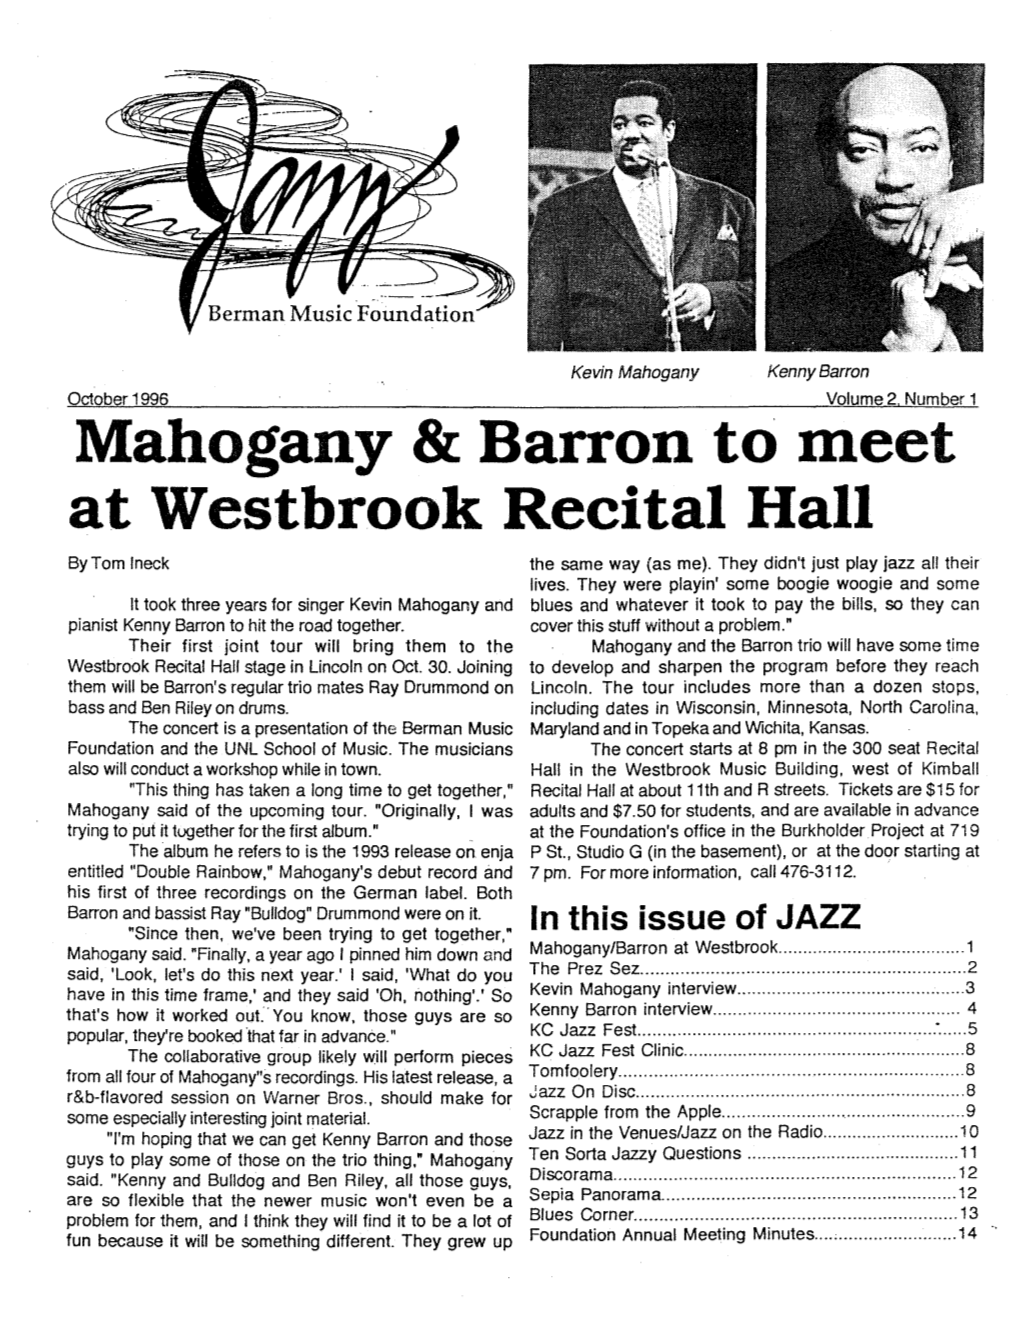 Barron to Meet at Westbrook Recital Hall by Tom Ineck the Same Way (As Me)